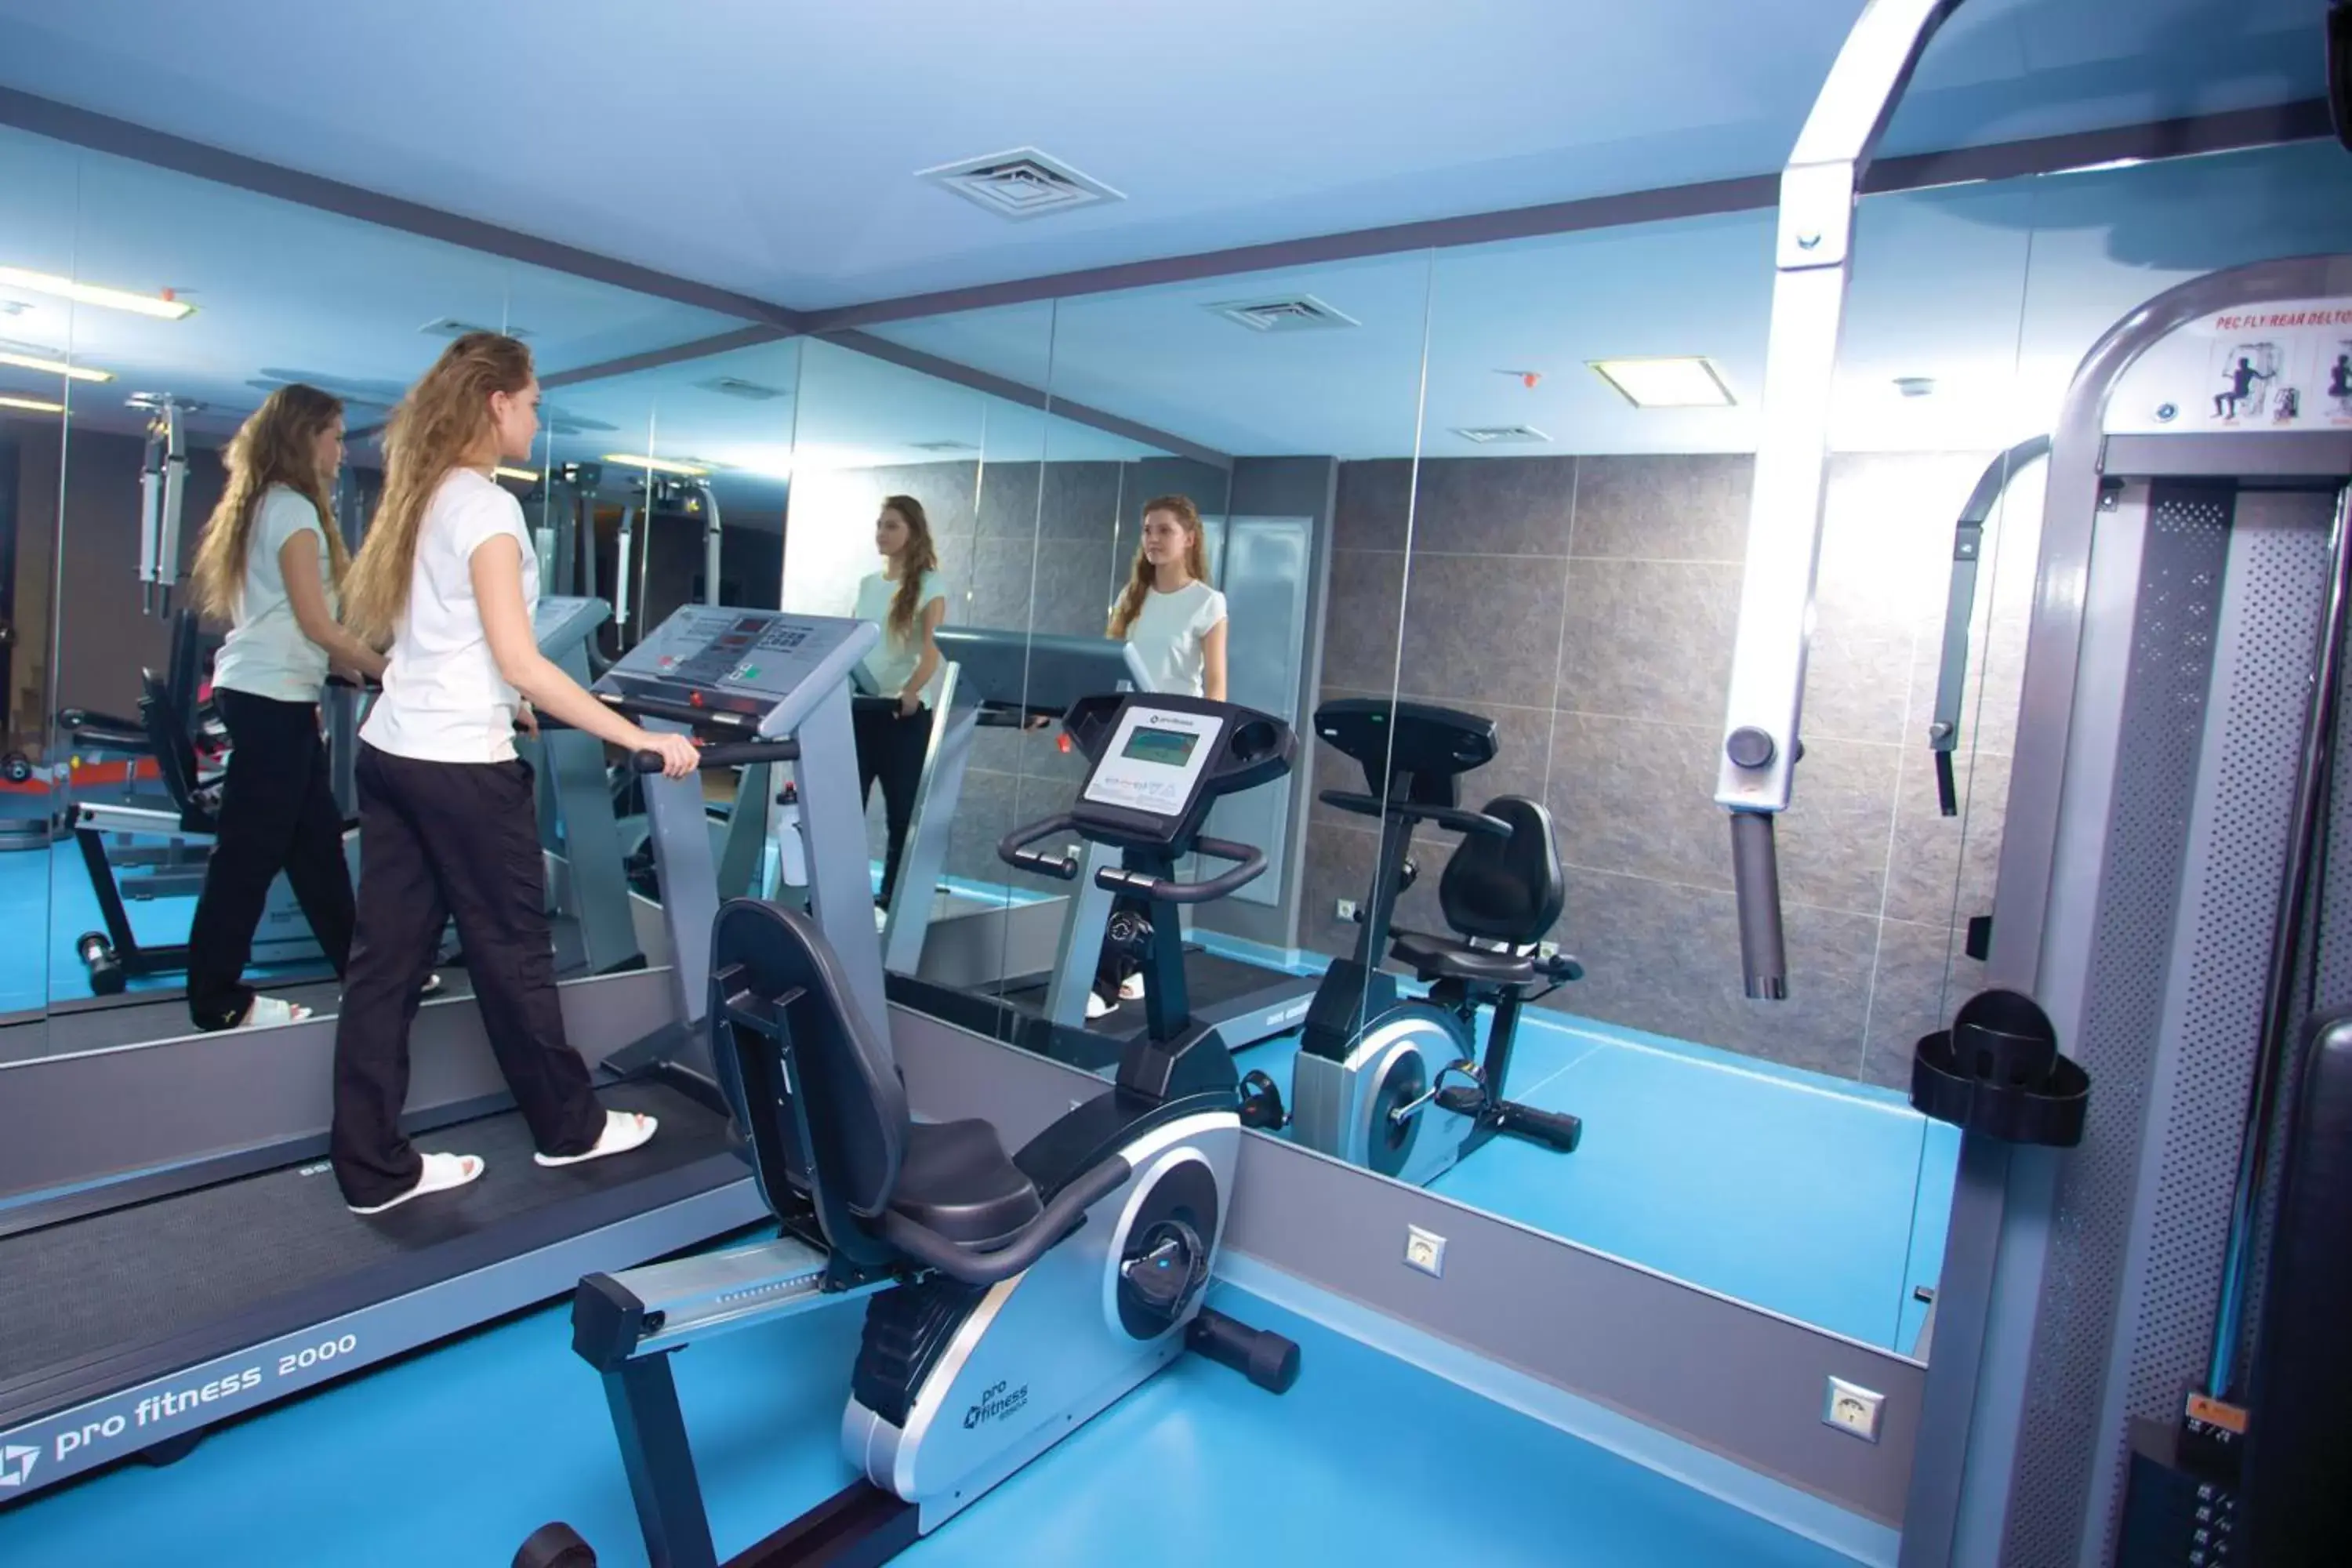 Fitness centre/facilities, Fitness Center/Facilities in The Time Hotel Old City